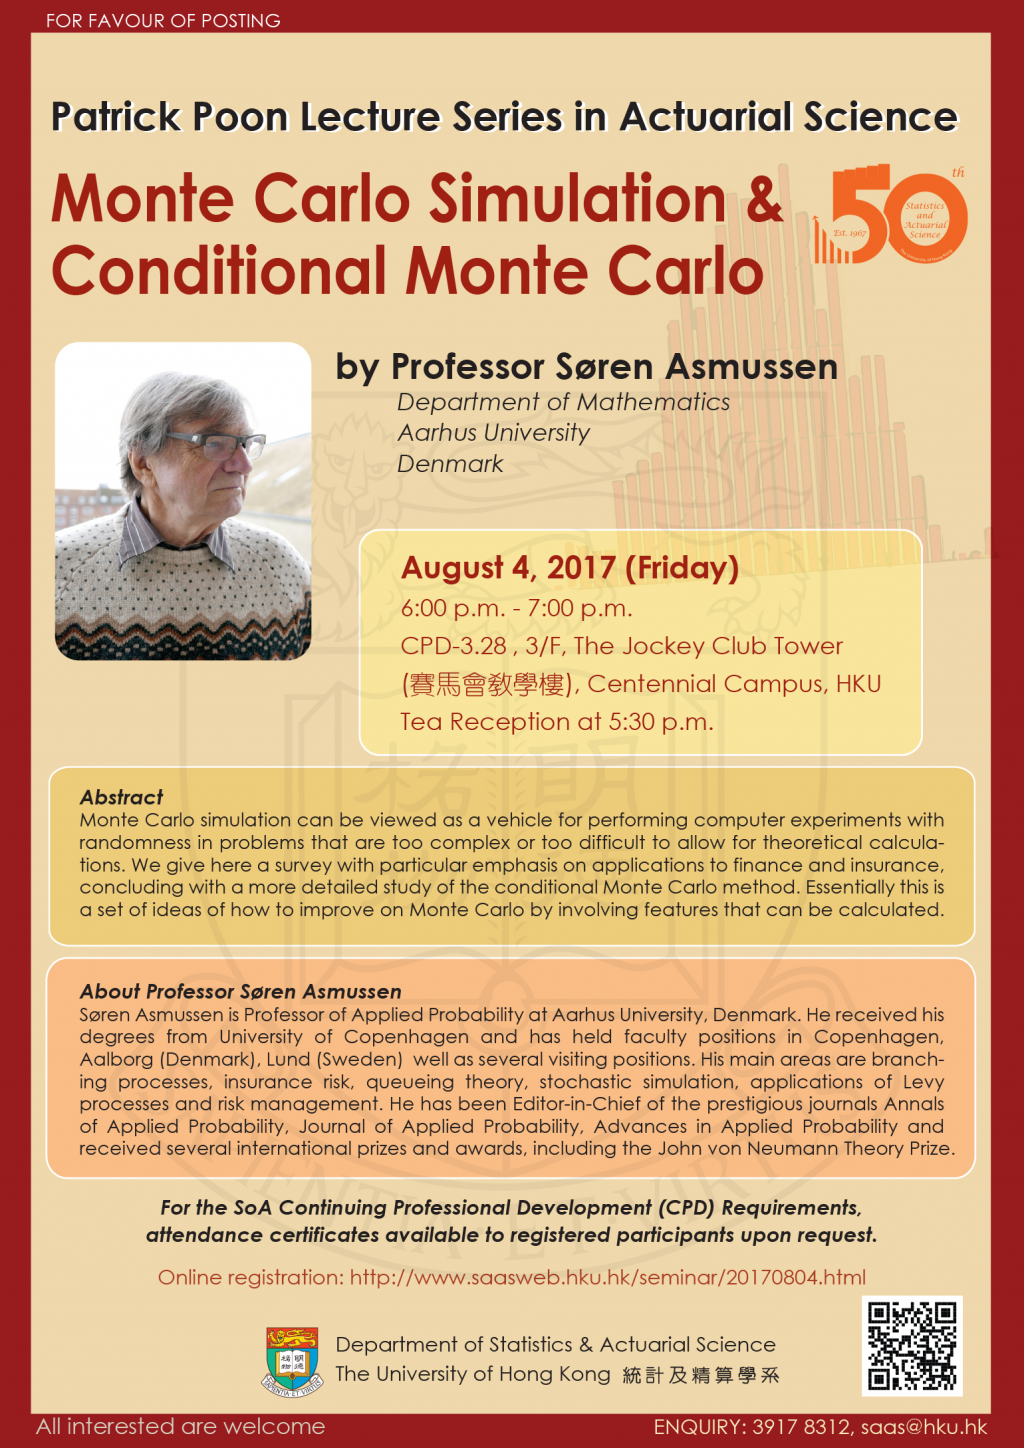 Patrick Poon Lecture Series in Actuarial Science on 'Monte Carlo Simulation & Conditional Monte Carlo' by Professor Søren Asmussen on AUG 4